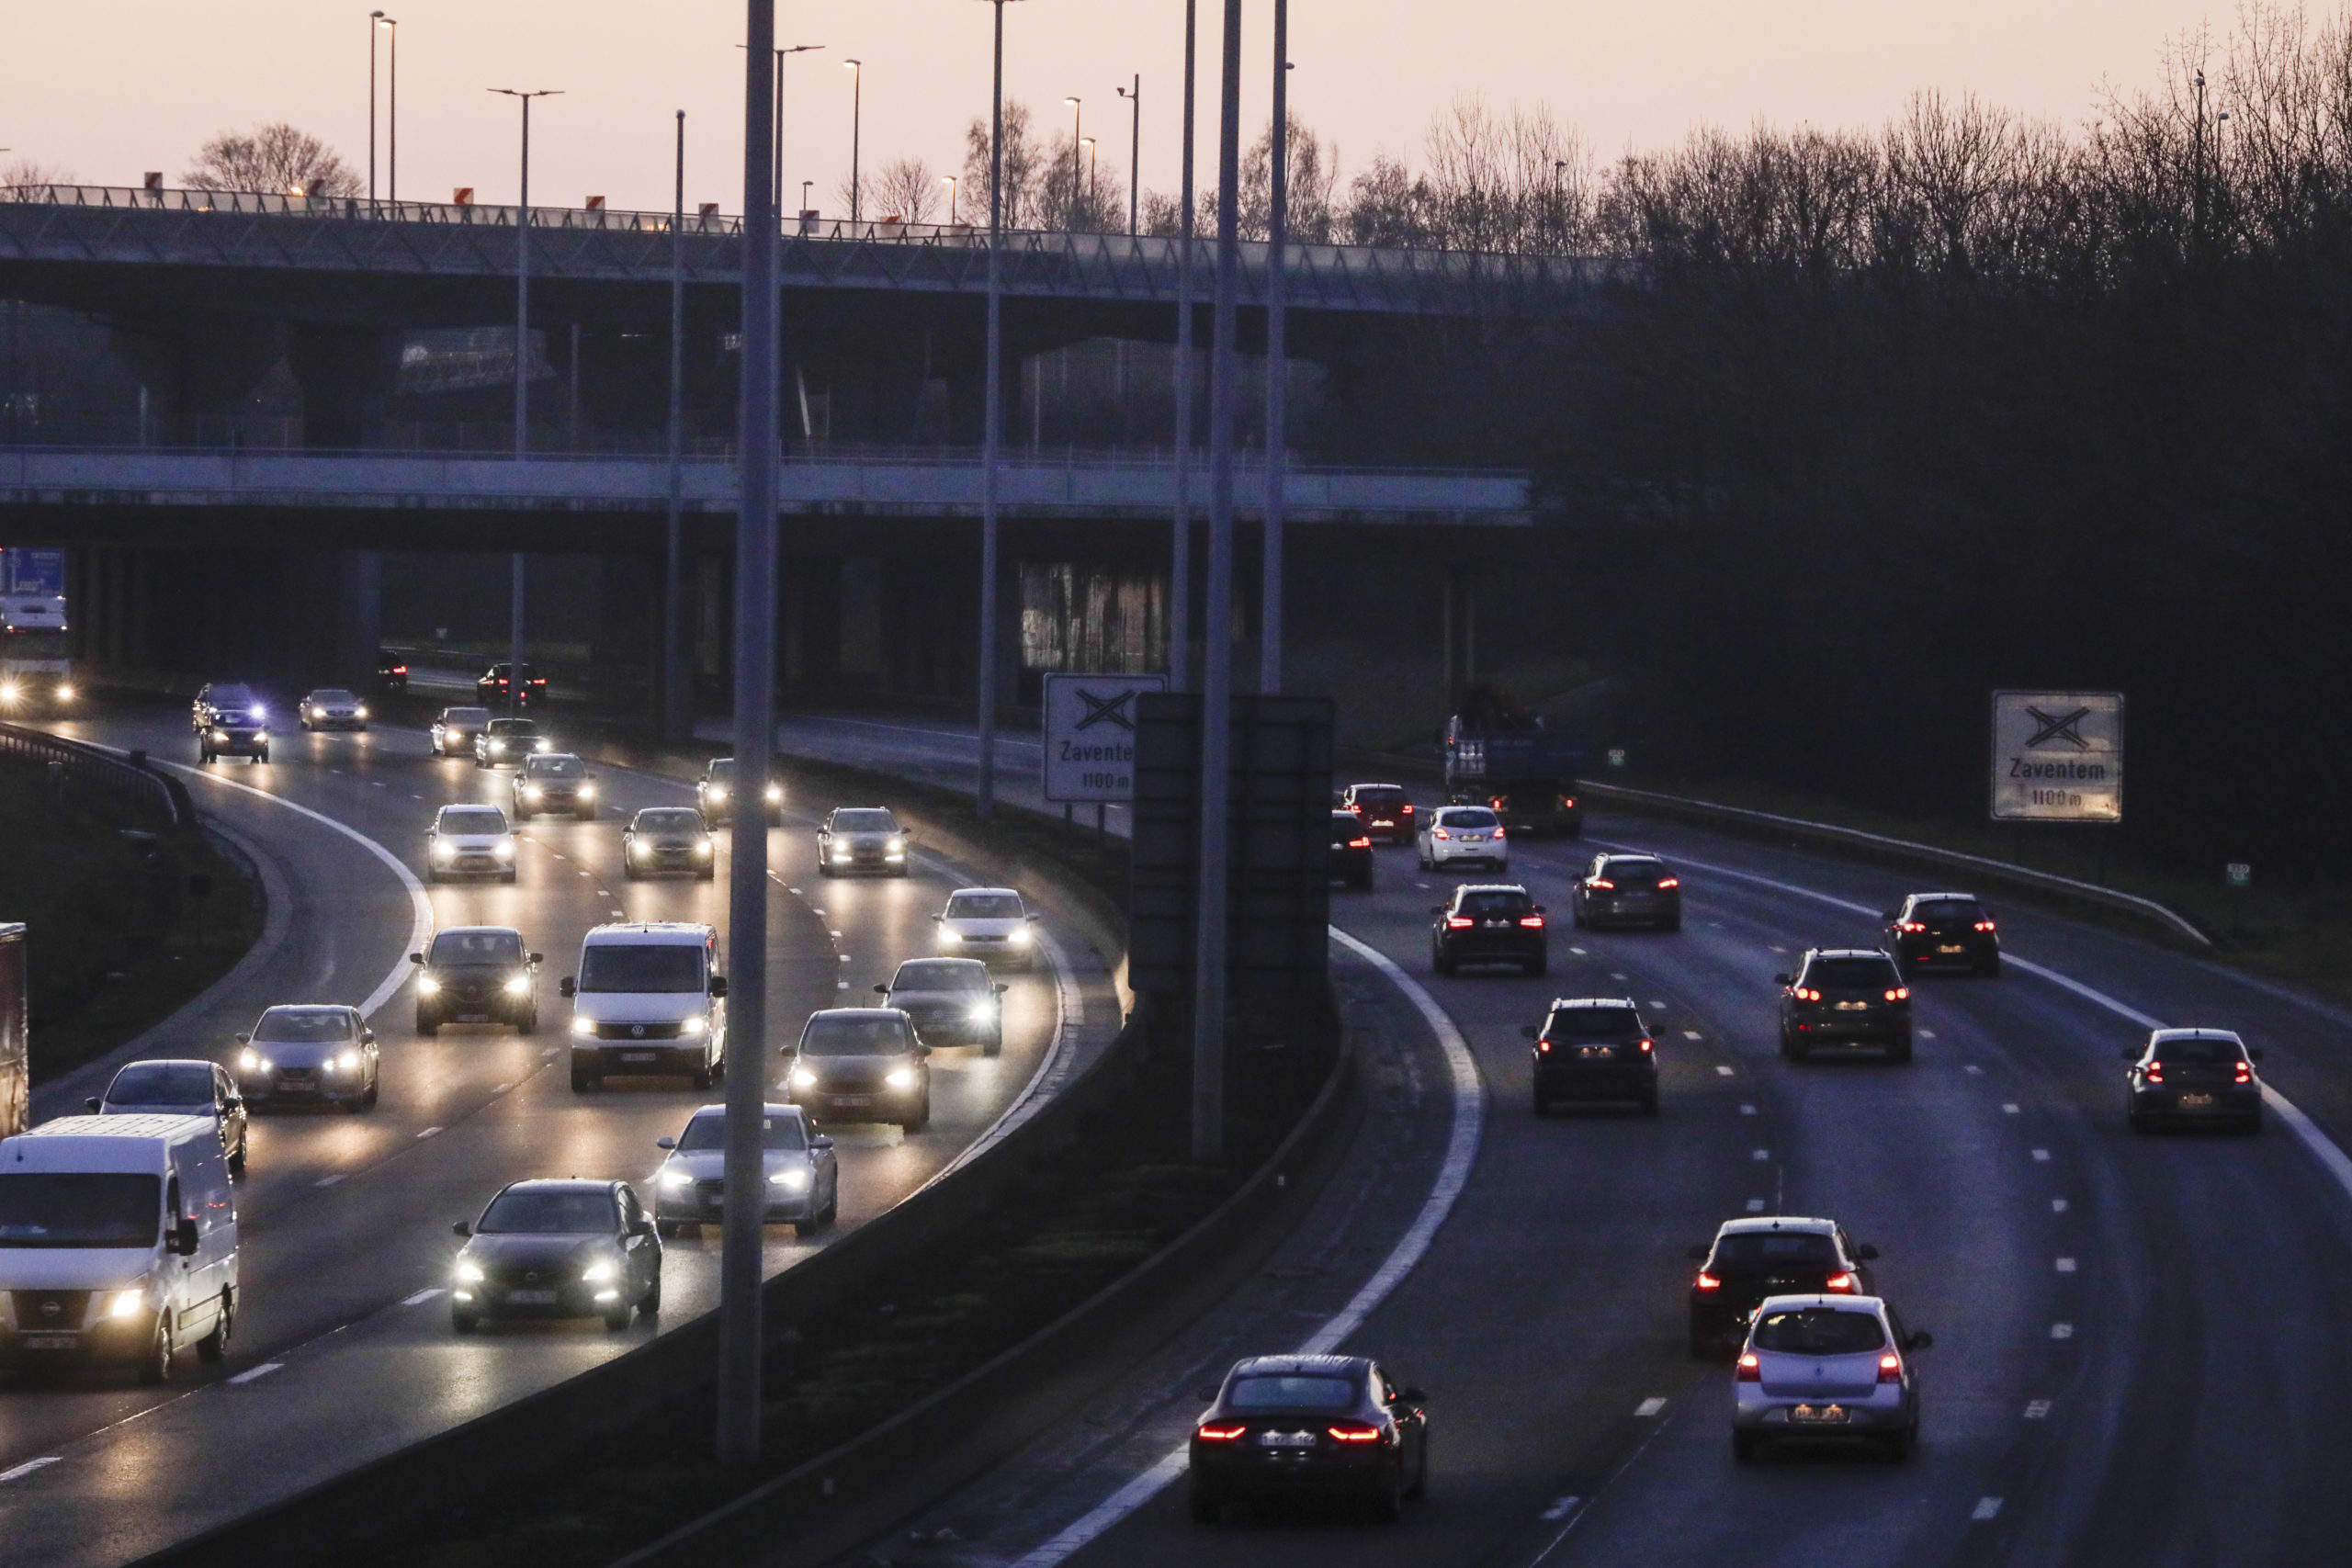 100 kph limit on Brussels ring-road will be introduced in 2020